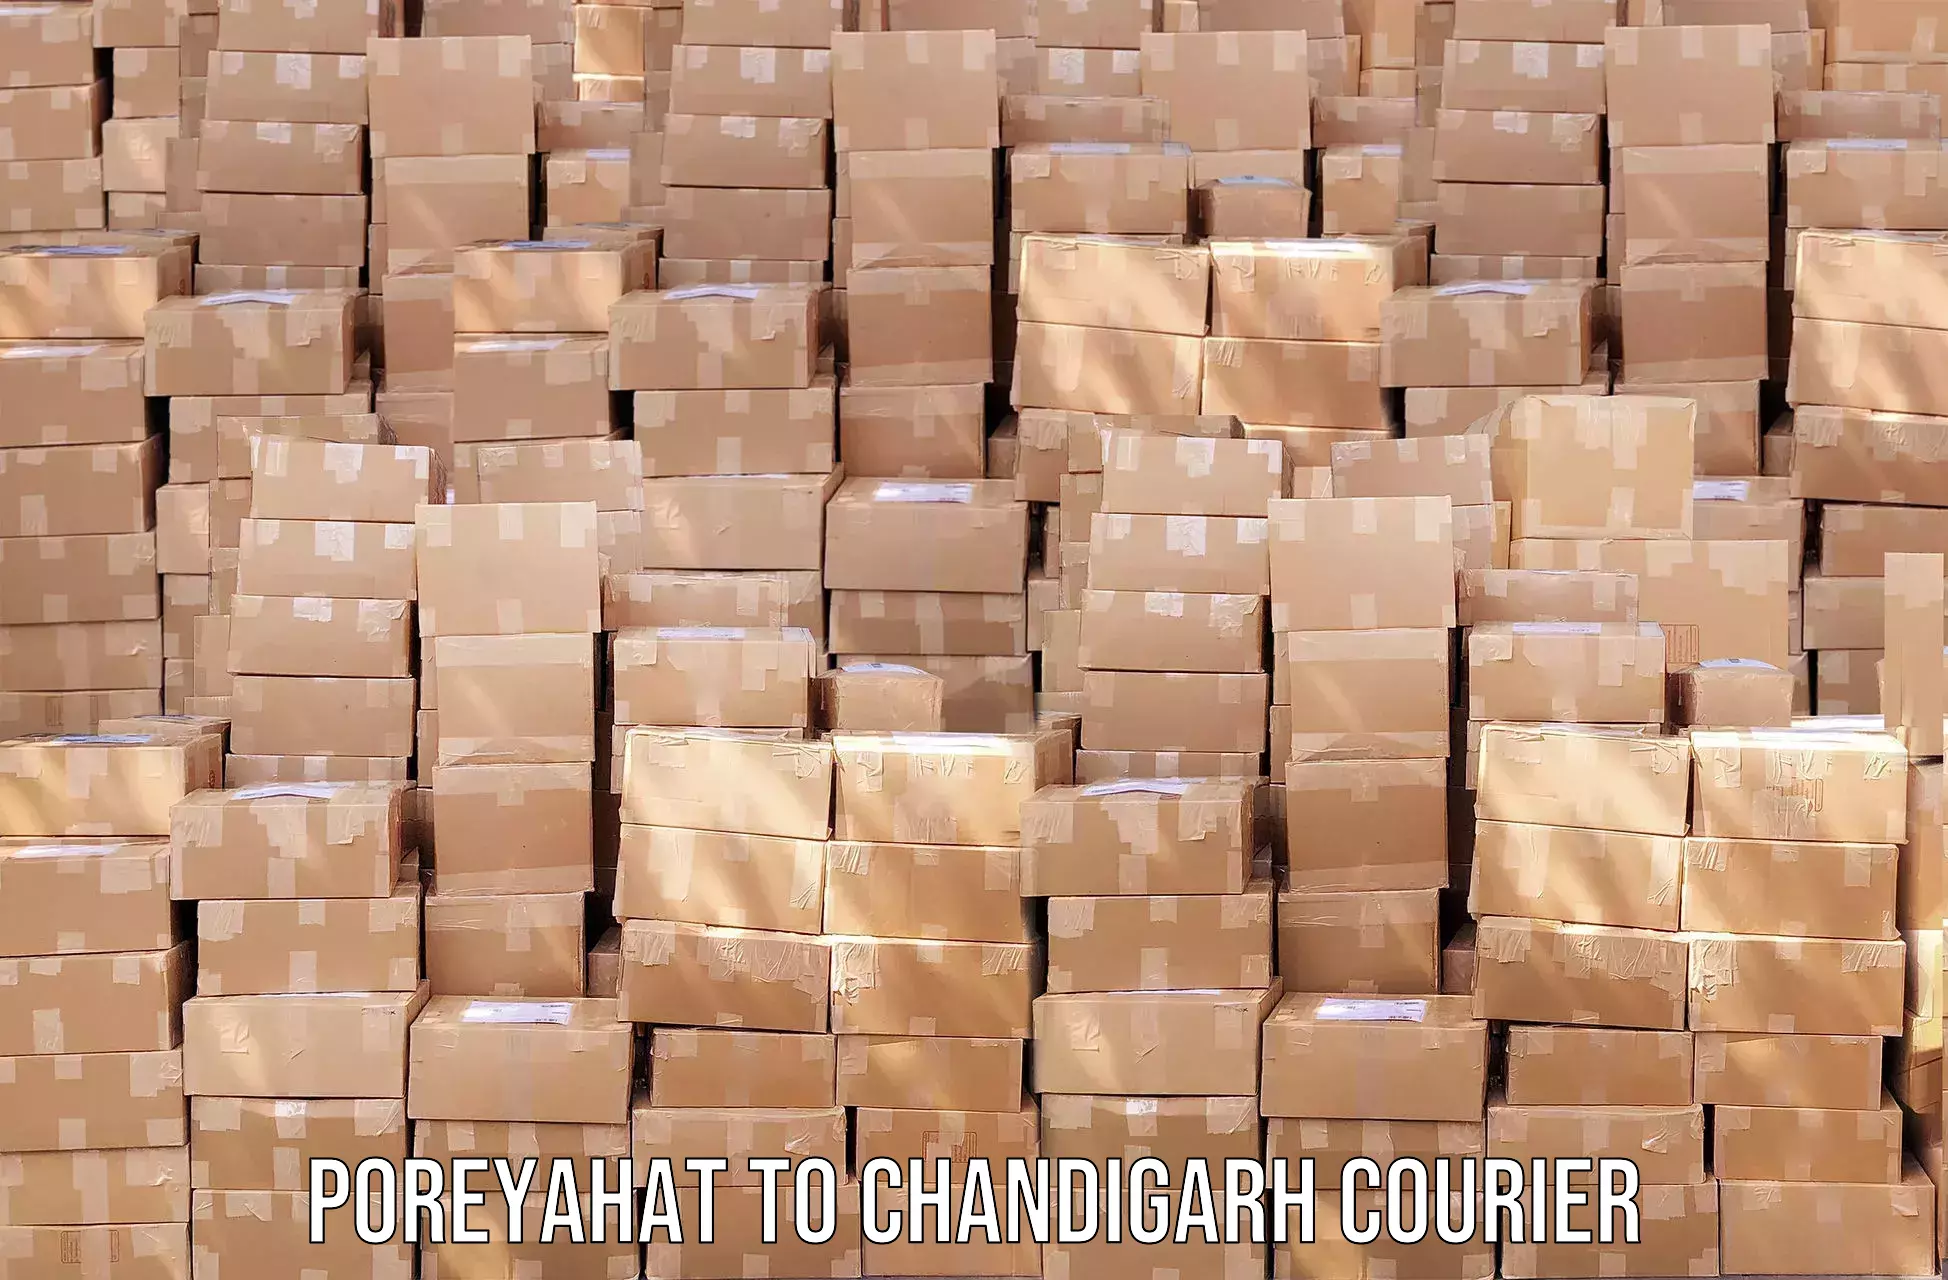 Subscription-based courier Poreyahat to Chandigarh